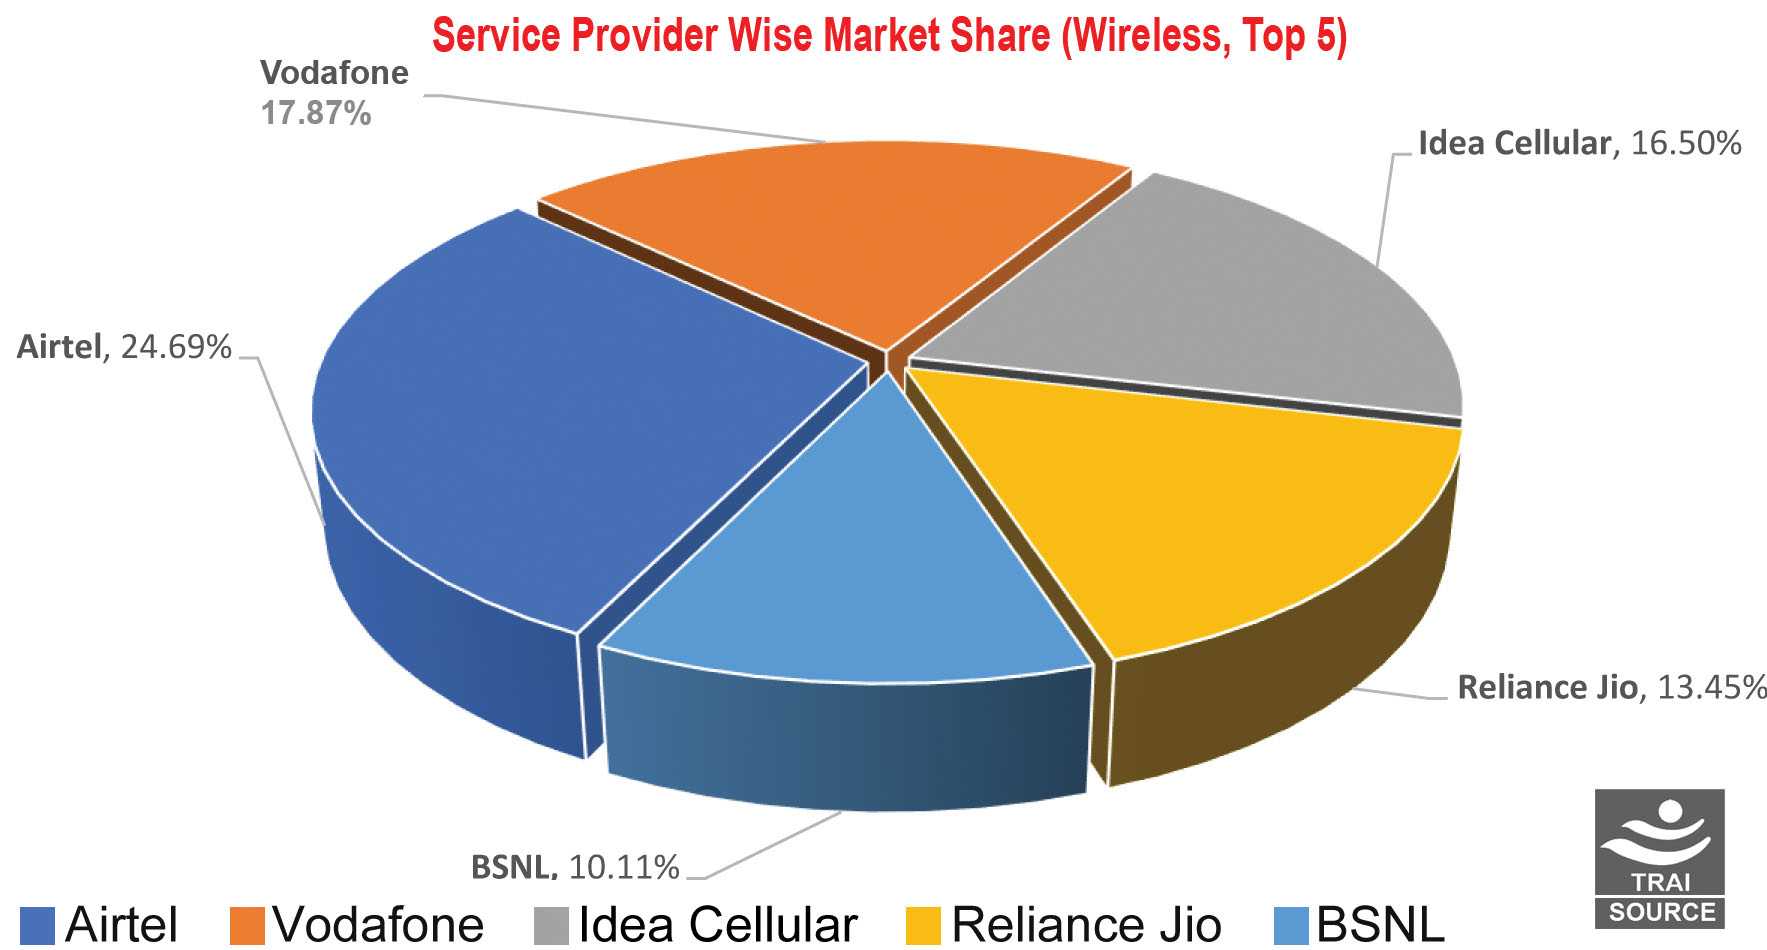 Service Provider Wise market Share (Wireless, Top 5)